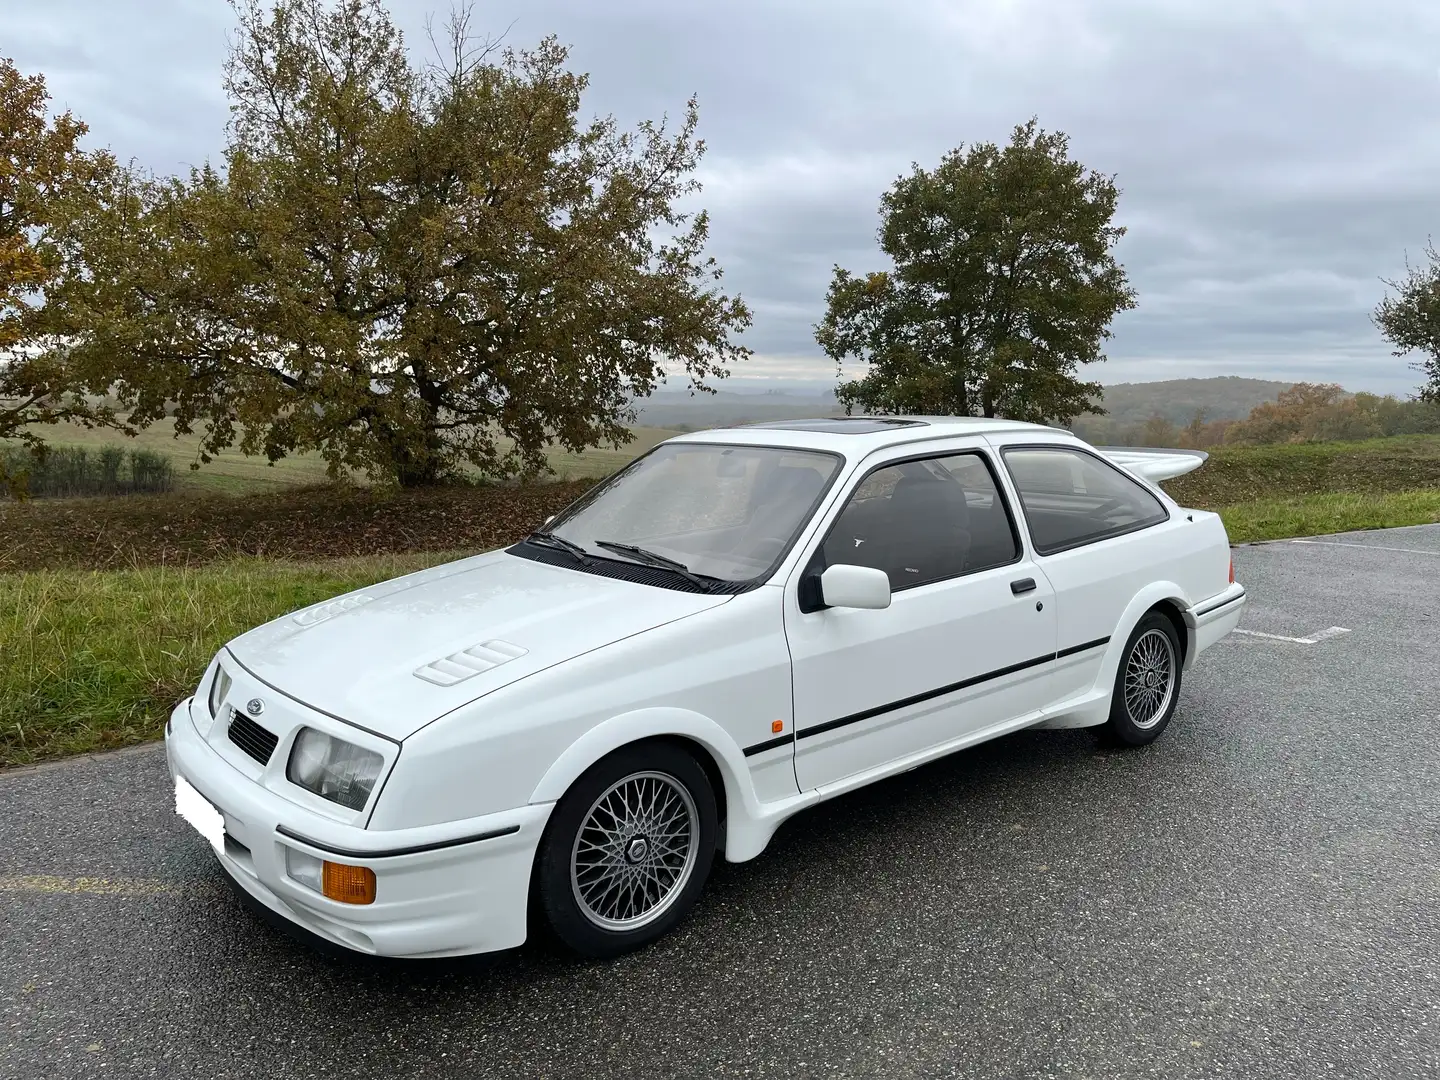 Ford Sierra 2.0i Tbo RS Cosworth / ETAT EXCEPTIONNEL White - 1